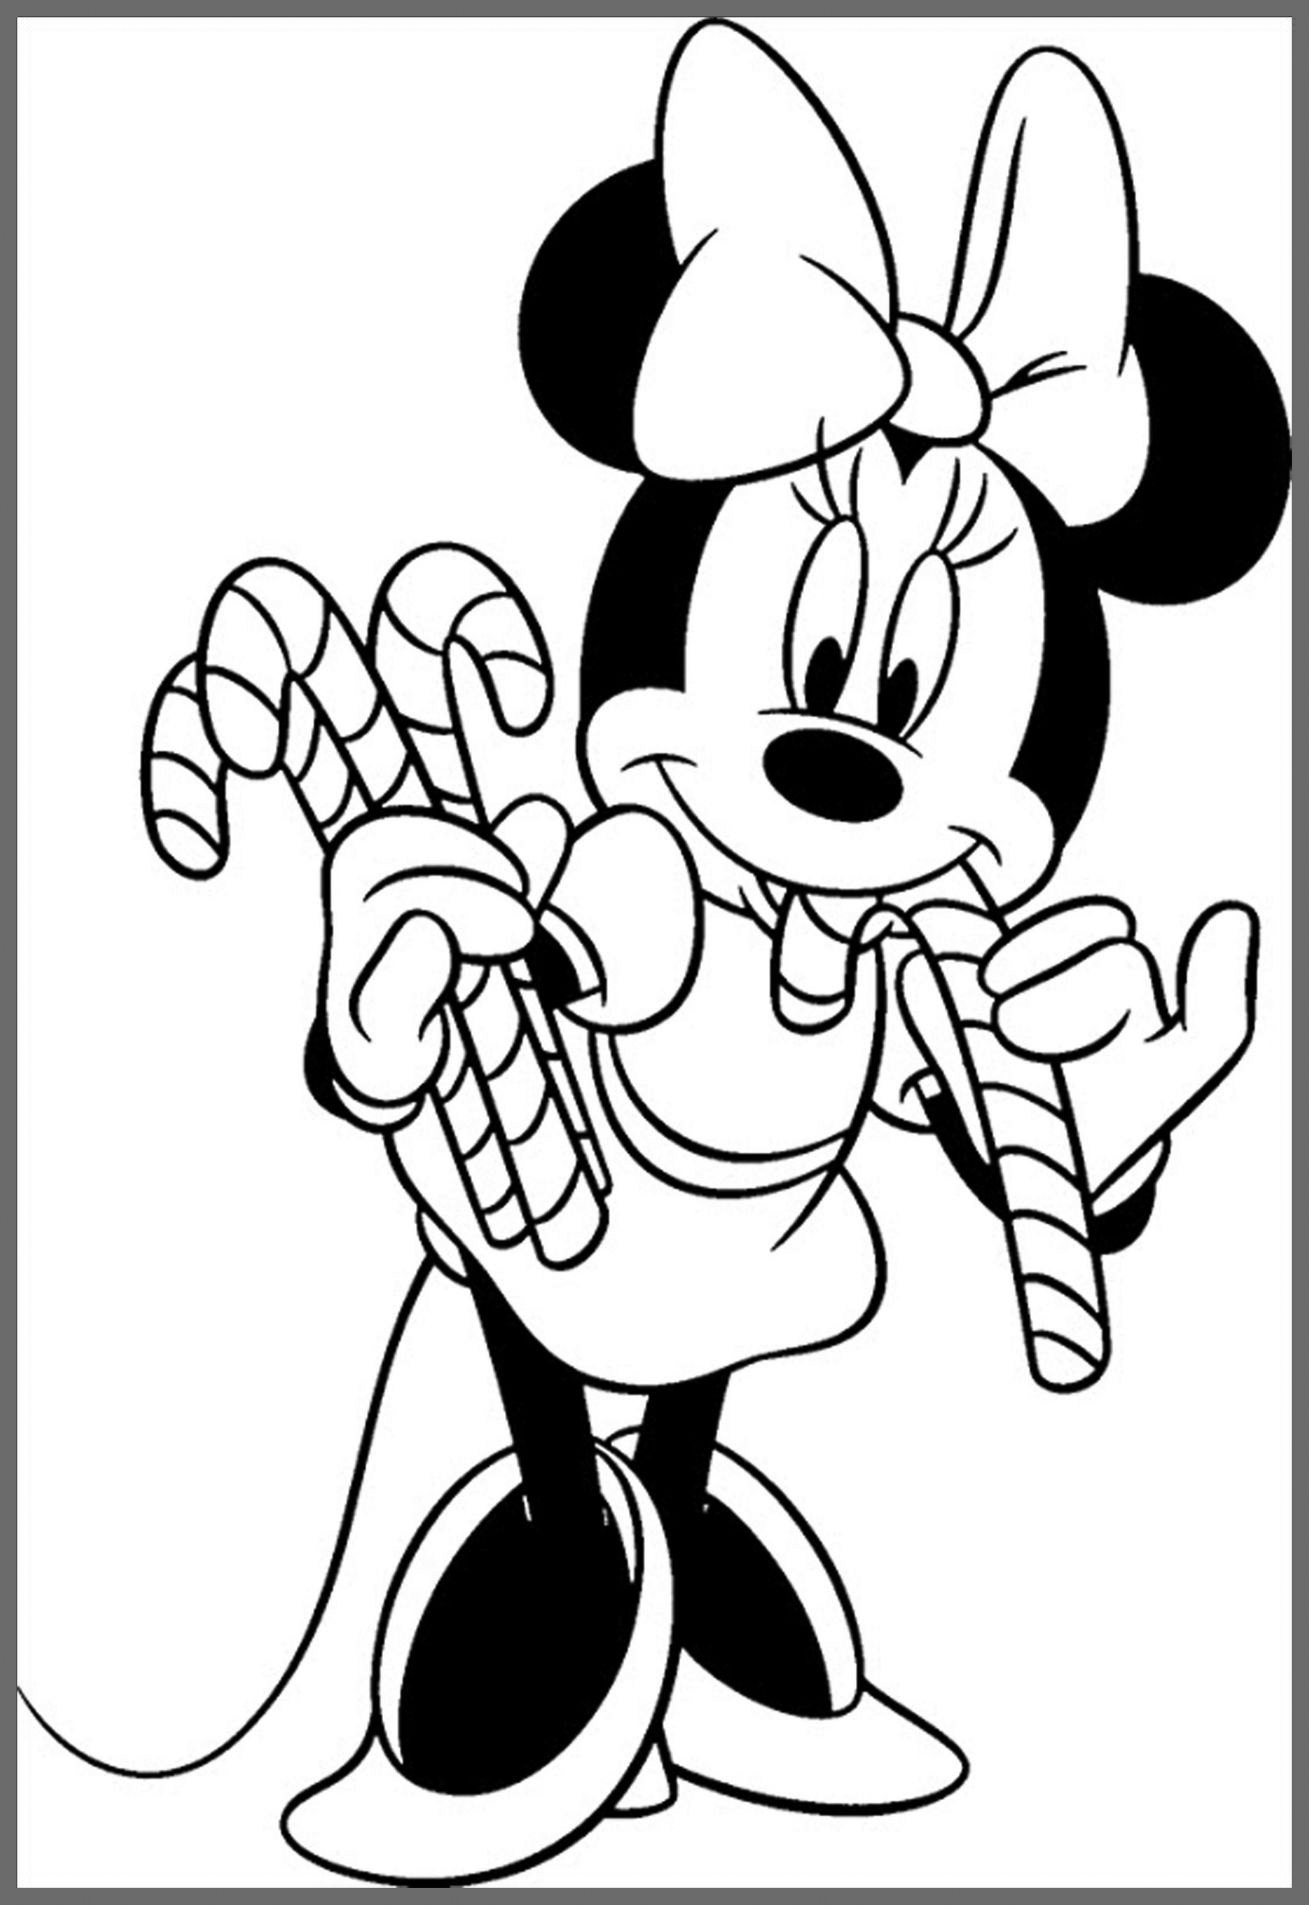 Mickey Mouse Christmas Coloring Pages   Best Coloring Pages For Kids